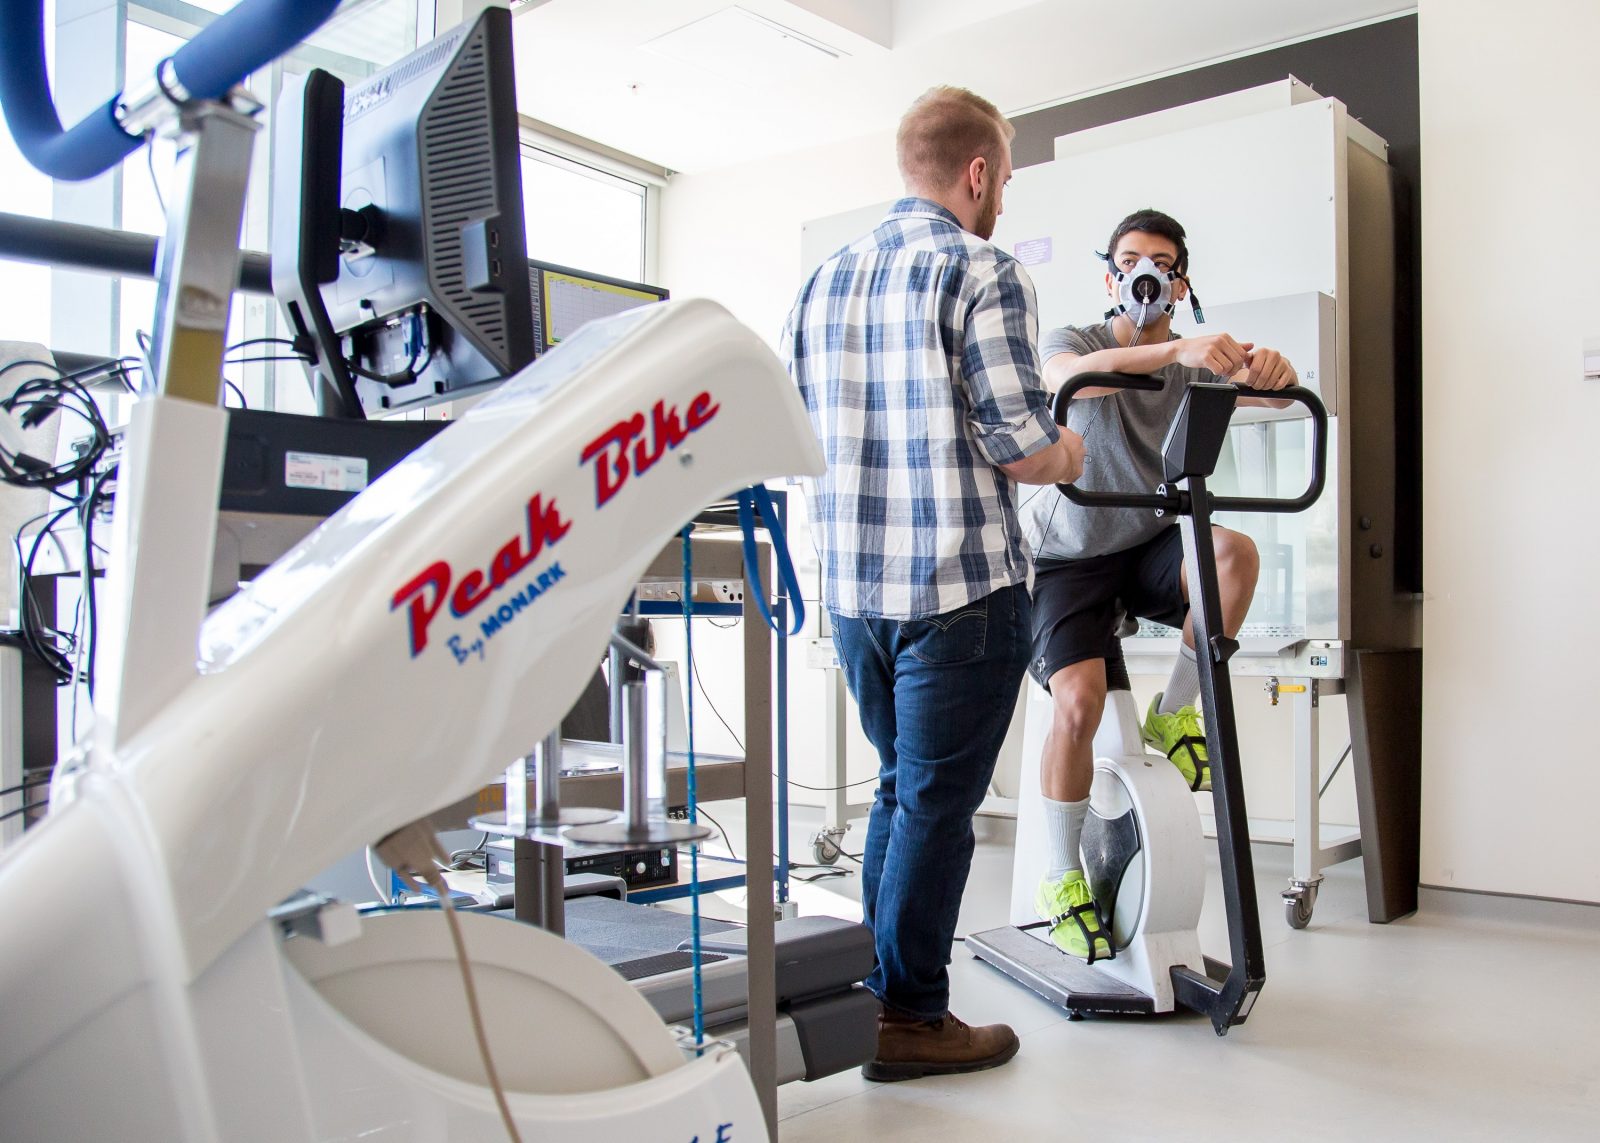 A man collects research data from another man sitting on a stationary bike.